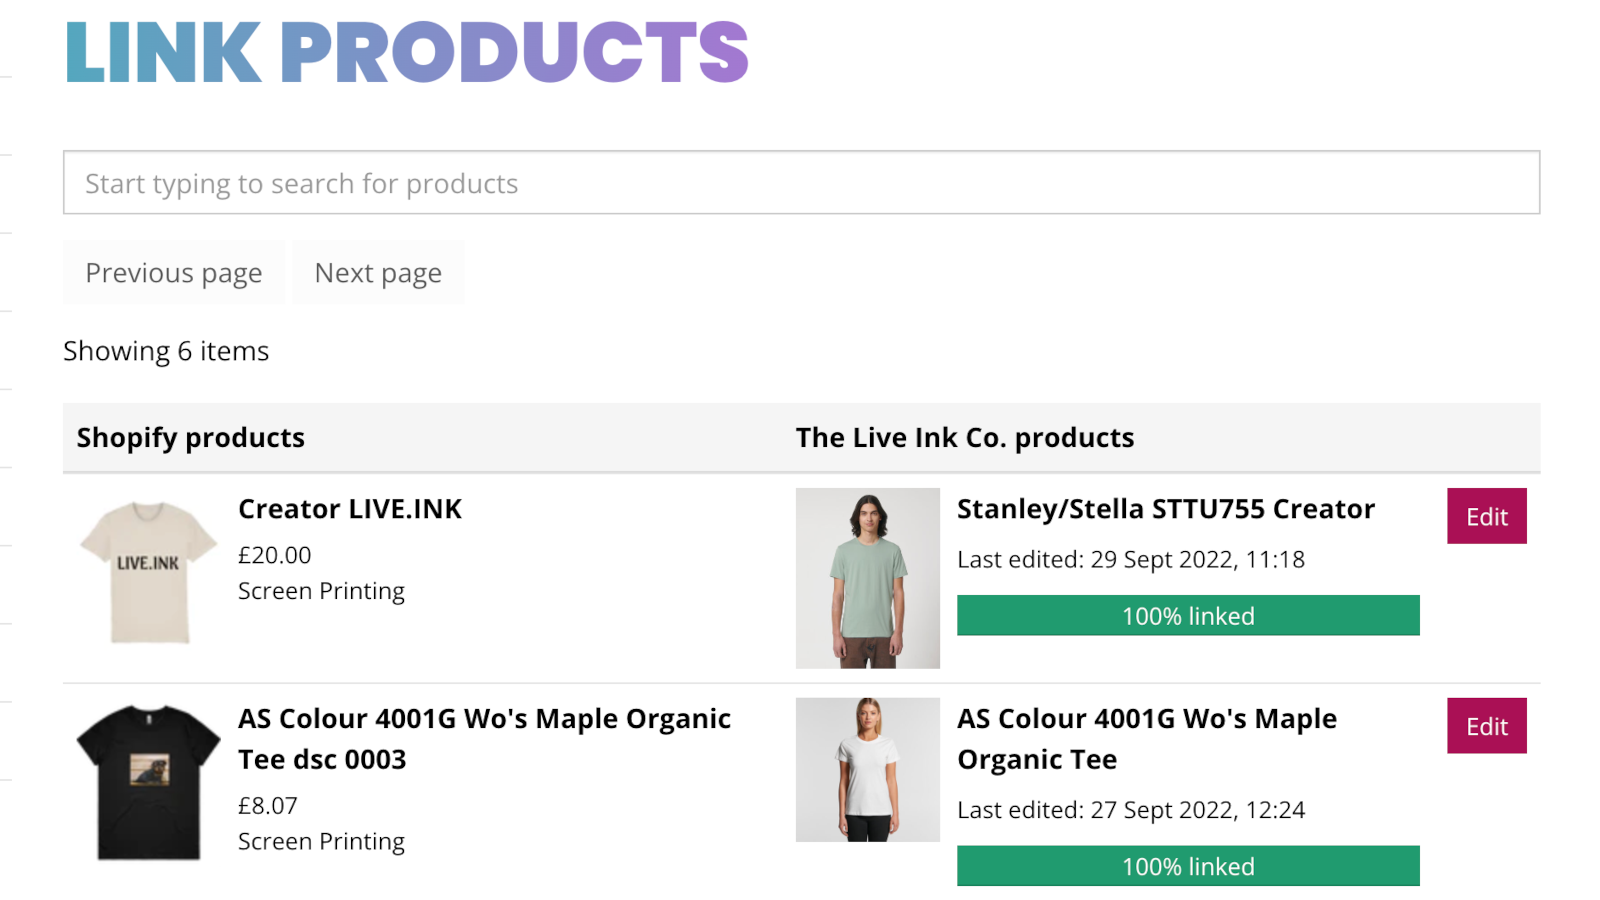 Link your existing products and we dispatch to your customers